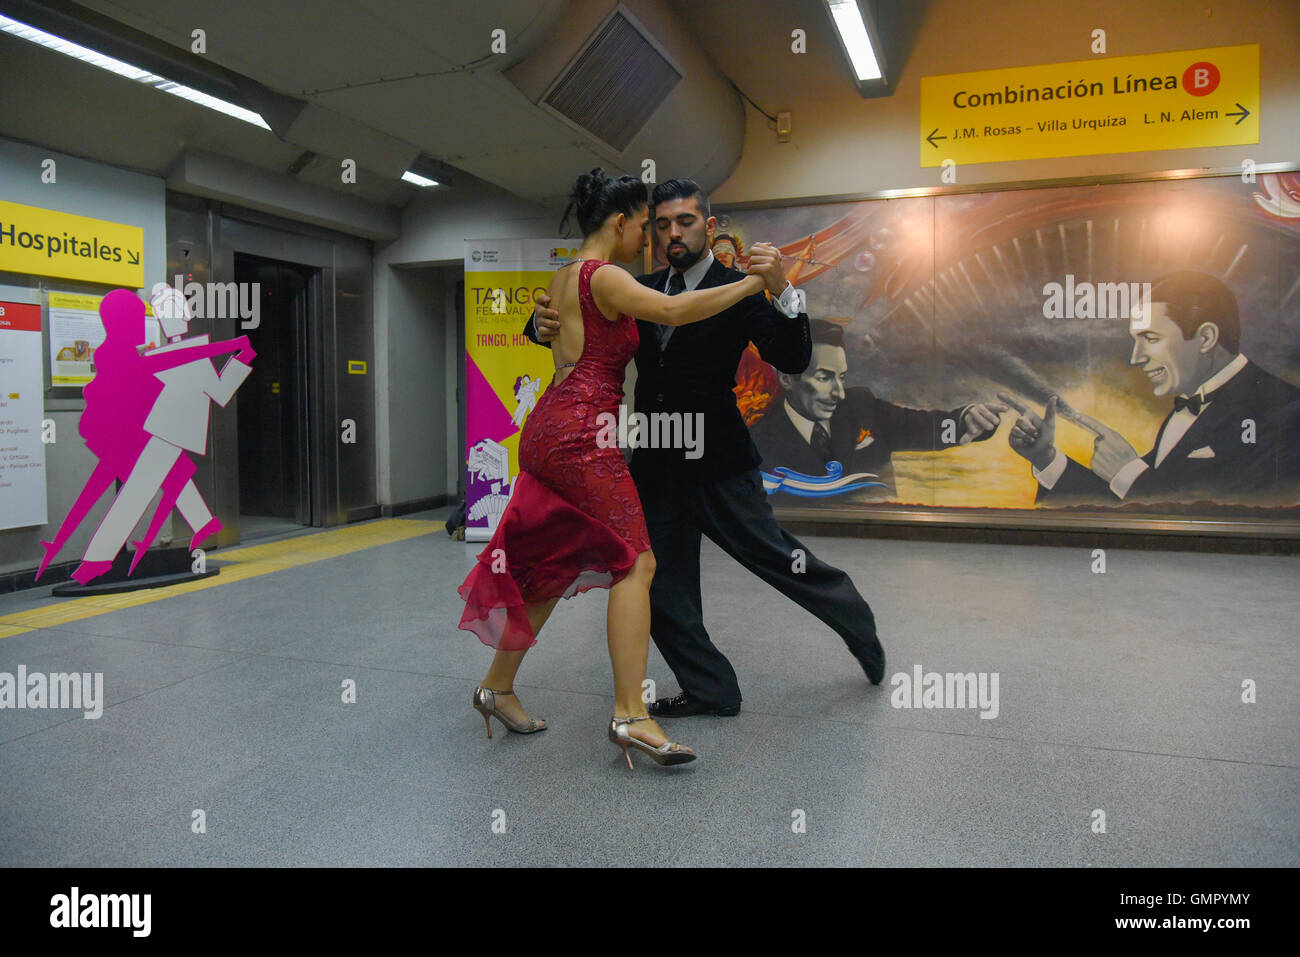 Buenos Aires, Argentina - 22 Aug 2016: Couple performs during the Tango Buenos Aires Festival in the subway station. Stock Photo